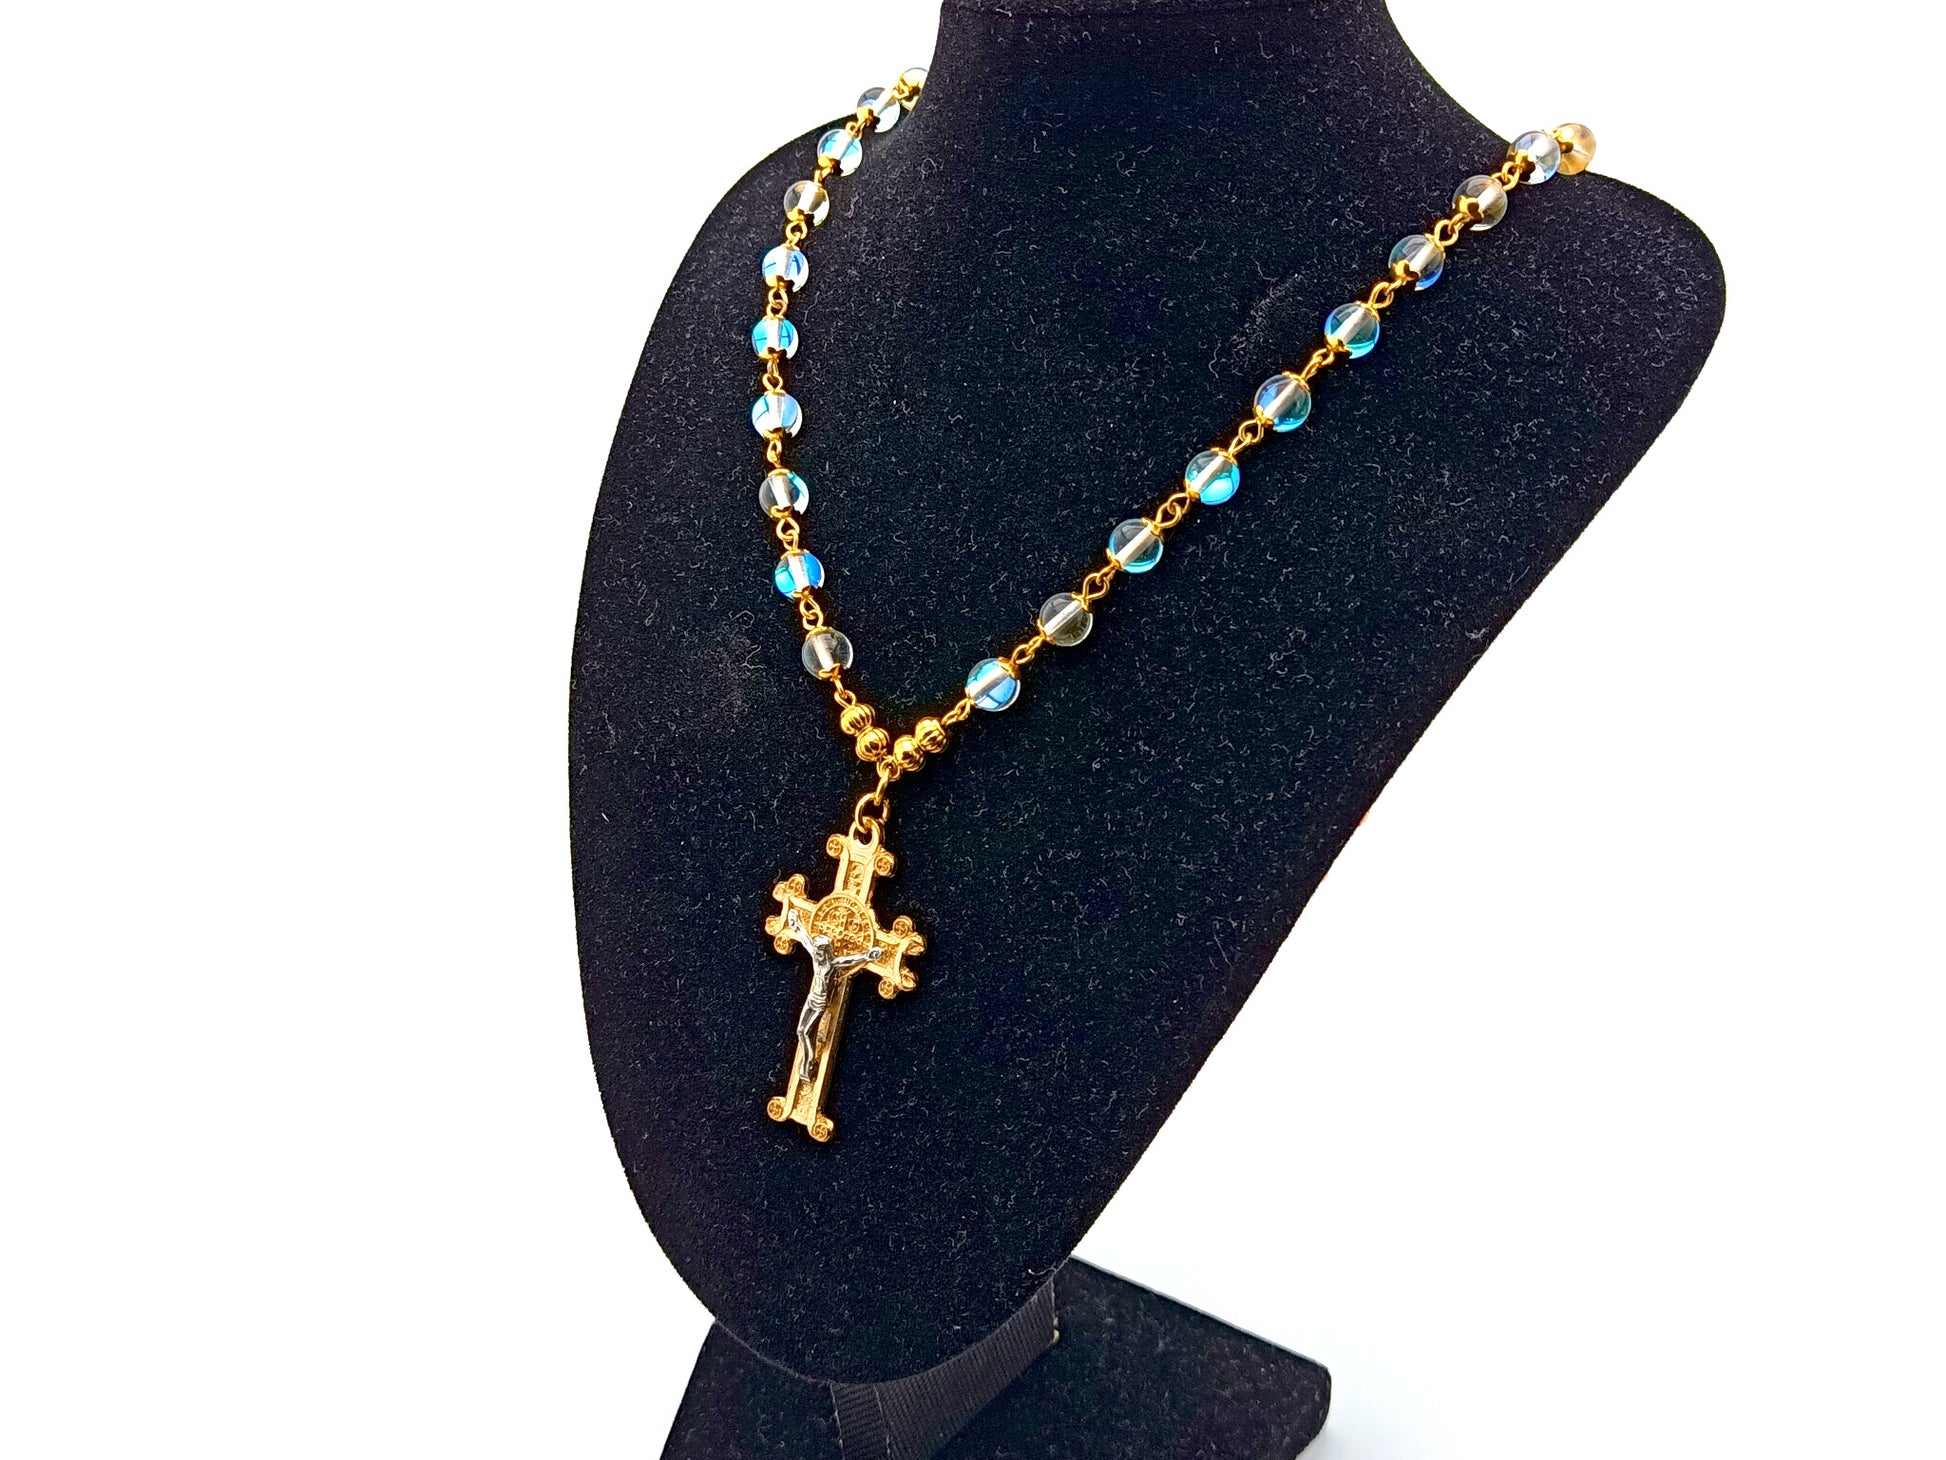 Saint Benedict unique rosary beads necklace and bracelet gift set with clear crystal and gold beads, golden Saint Benedict crucifix and medal.